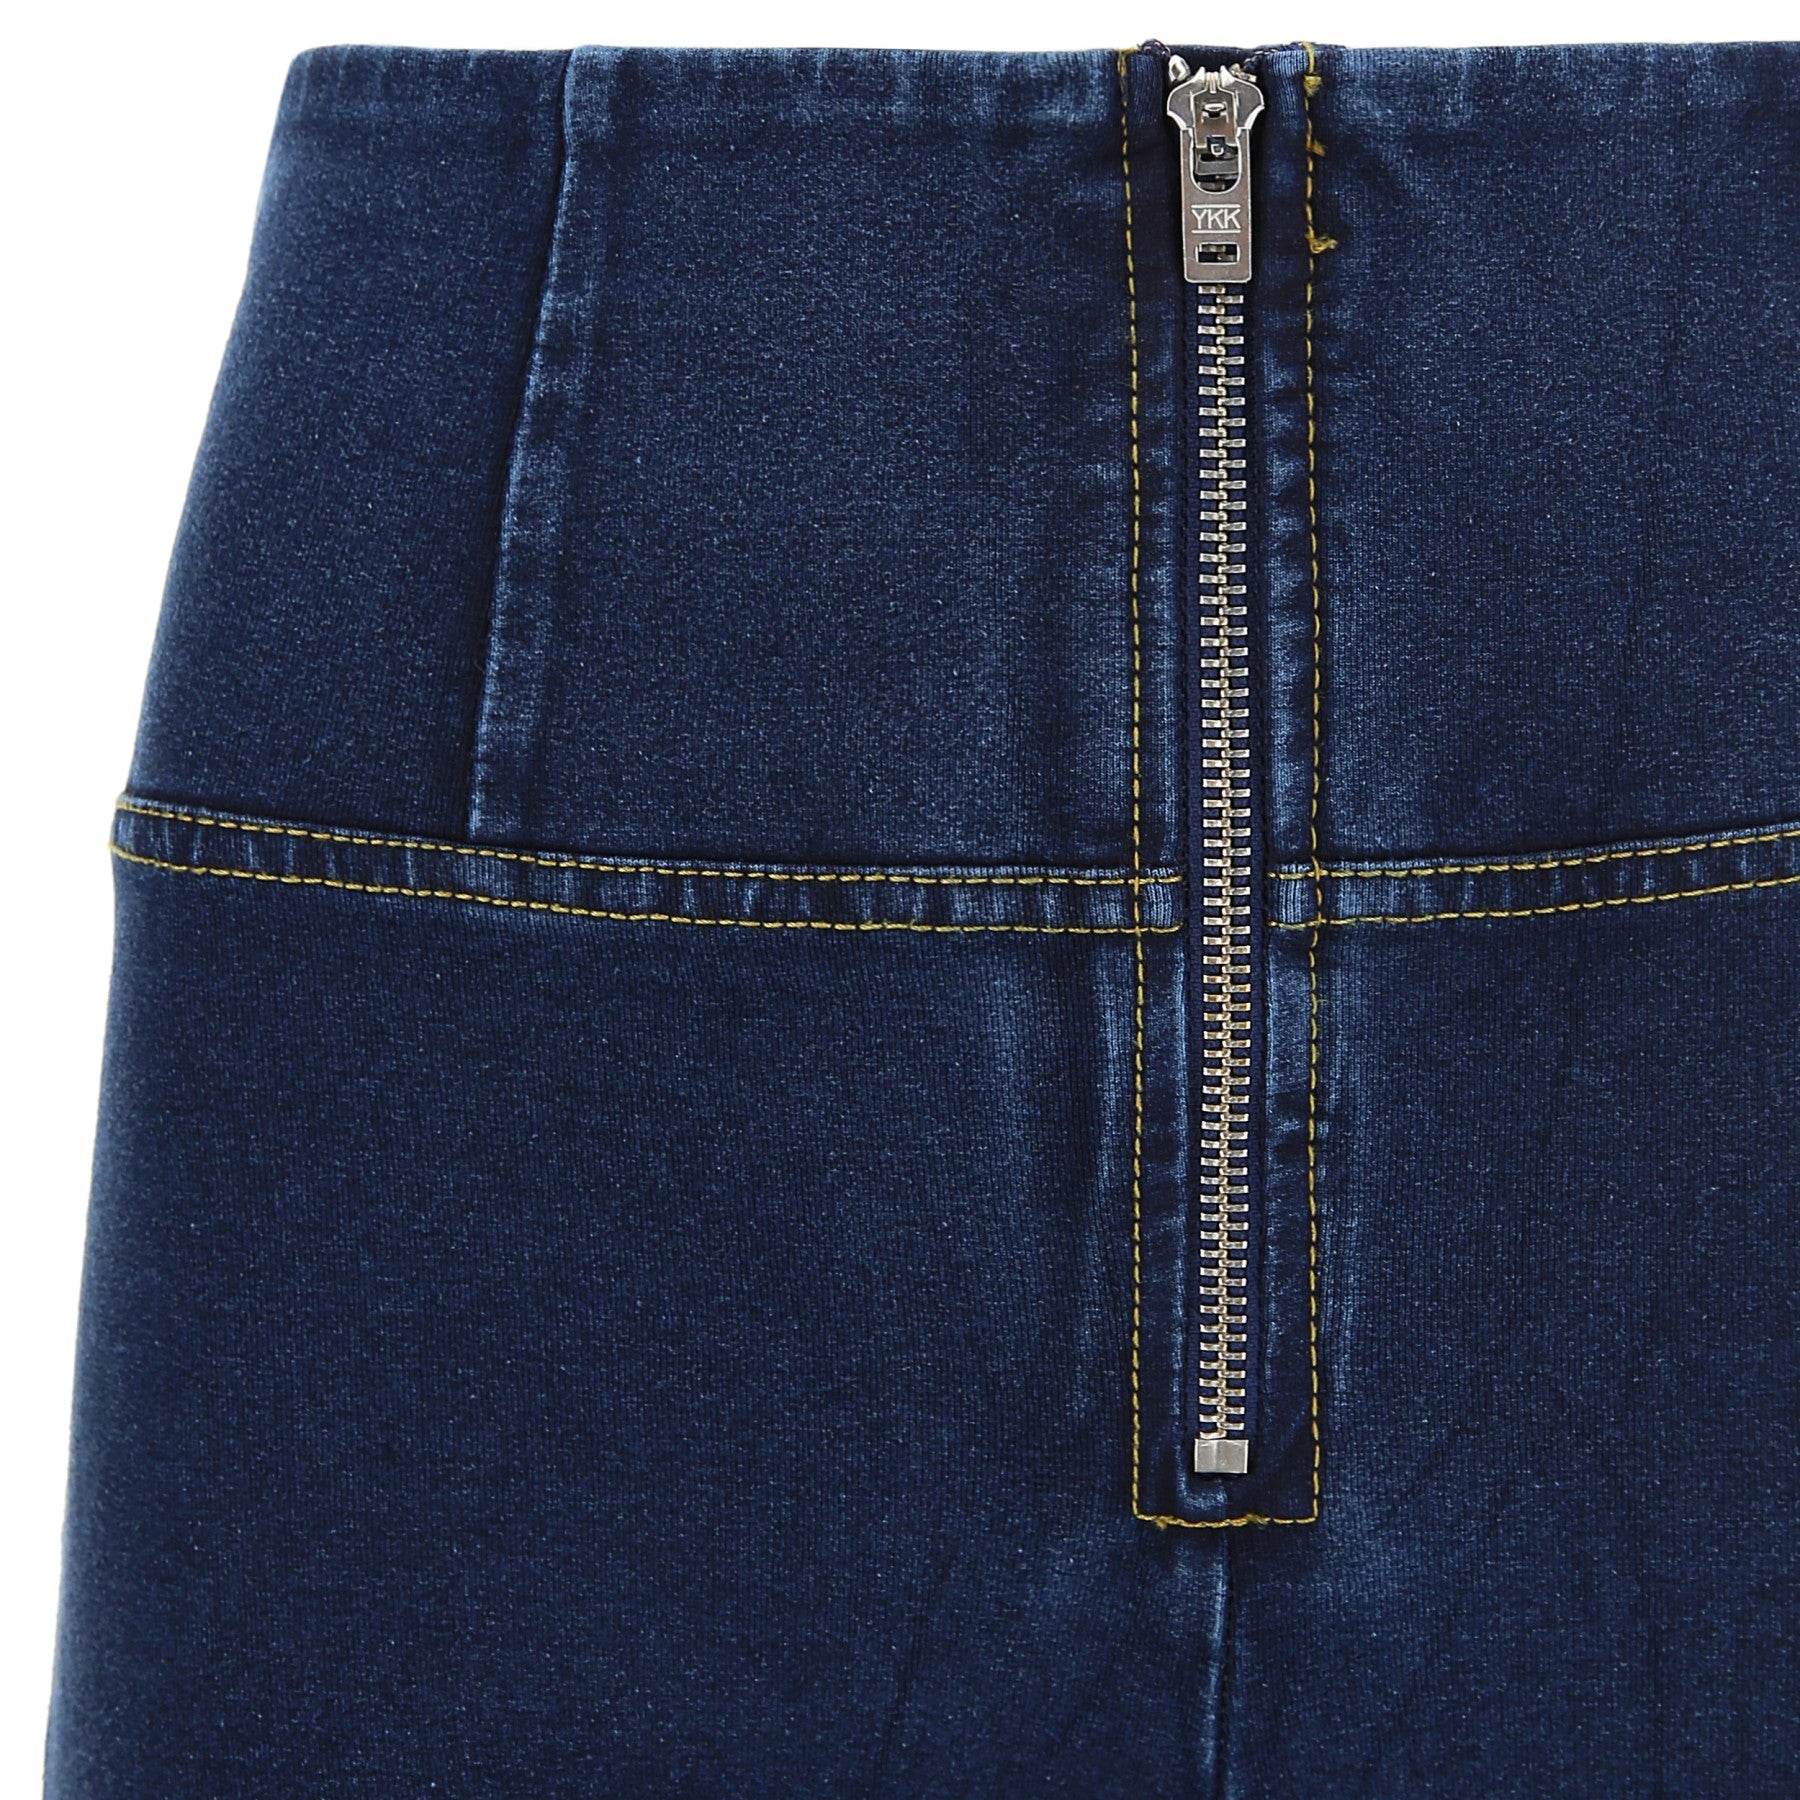 (WRUP1HJ01E-J0Y)WR.UP® HIGH-WAIST SKINNY-FIT BLUE PANTS IN STRETCH DENIM WITH SILVER ZIPPER